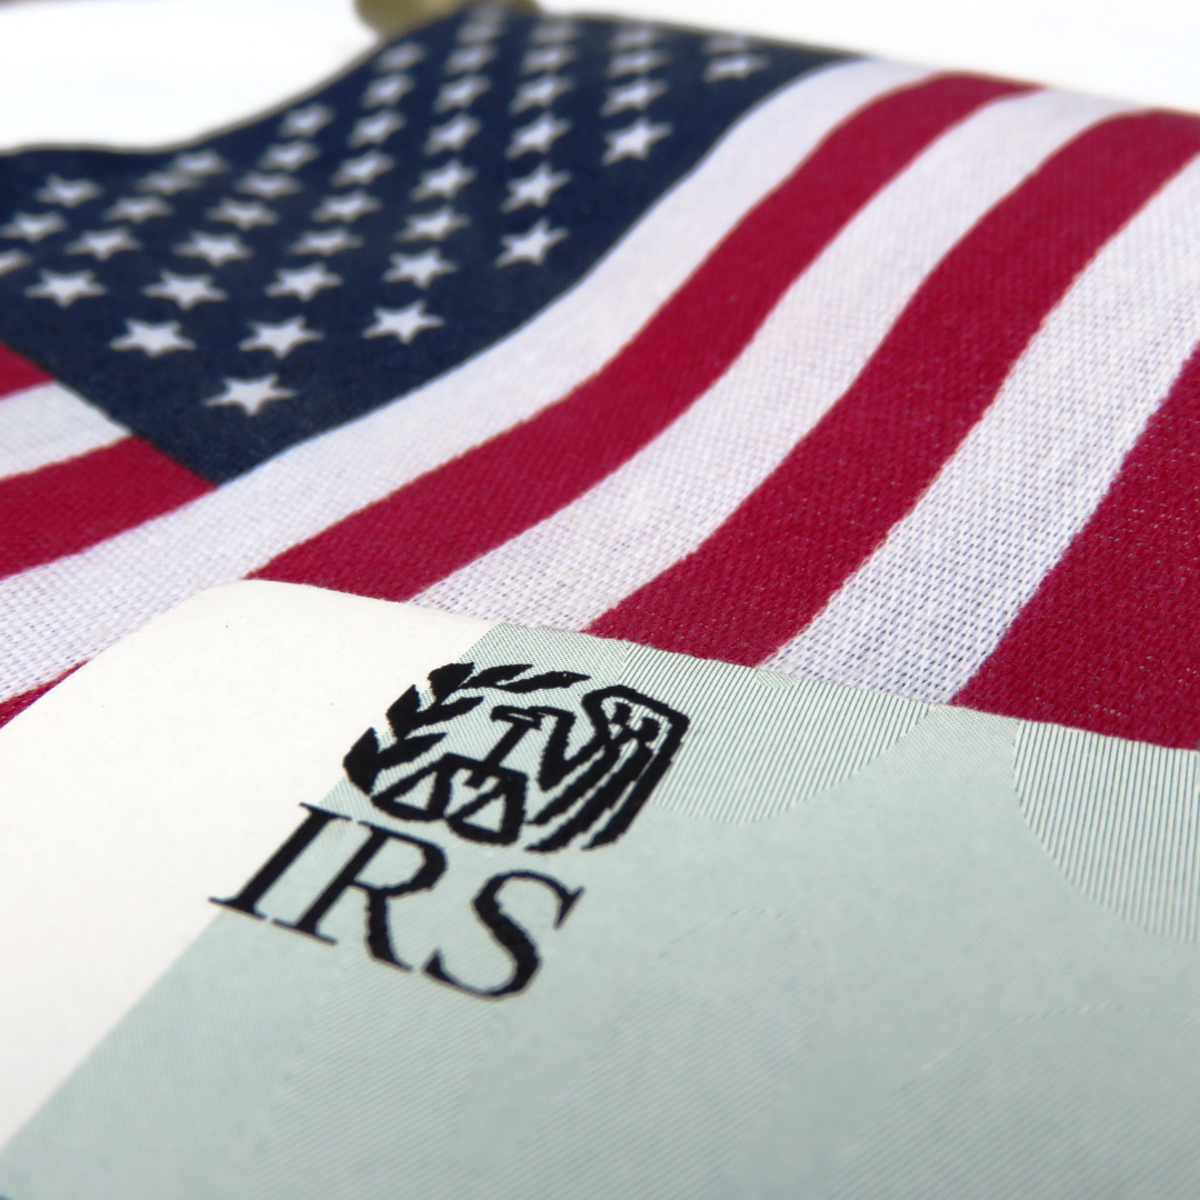 Don't do anything that will raise a red flag for the IRS.